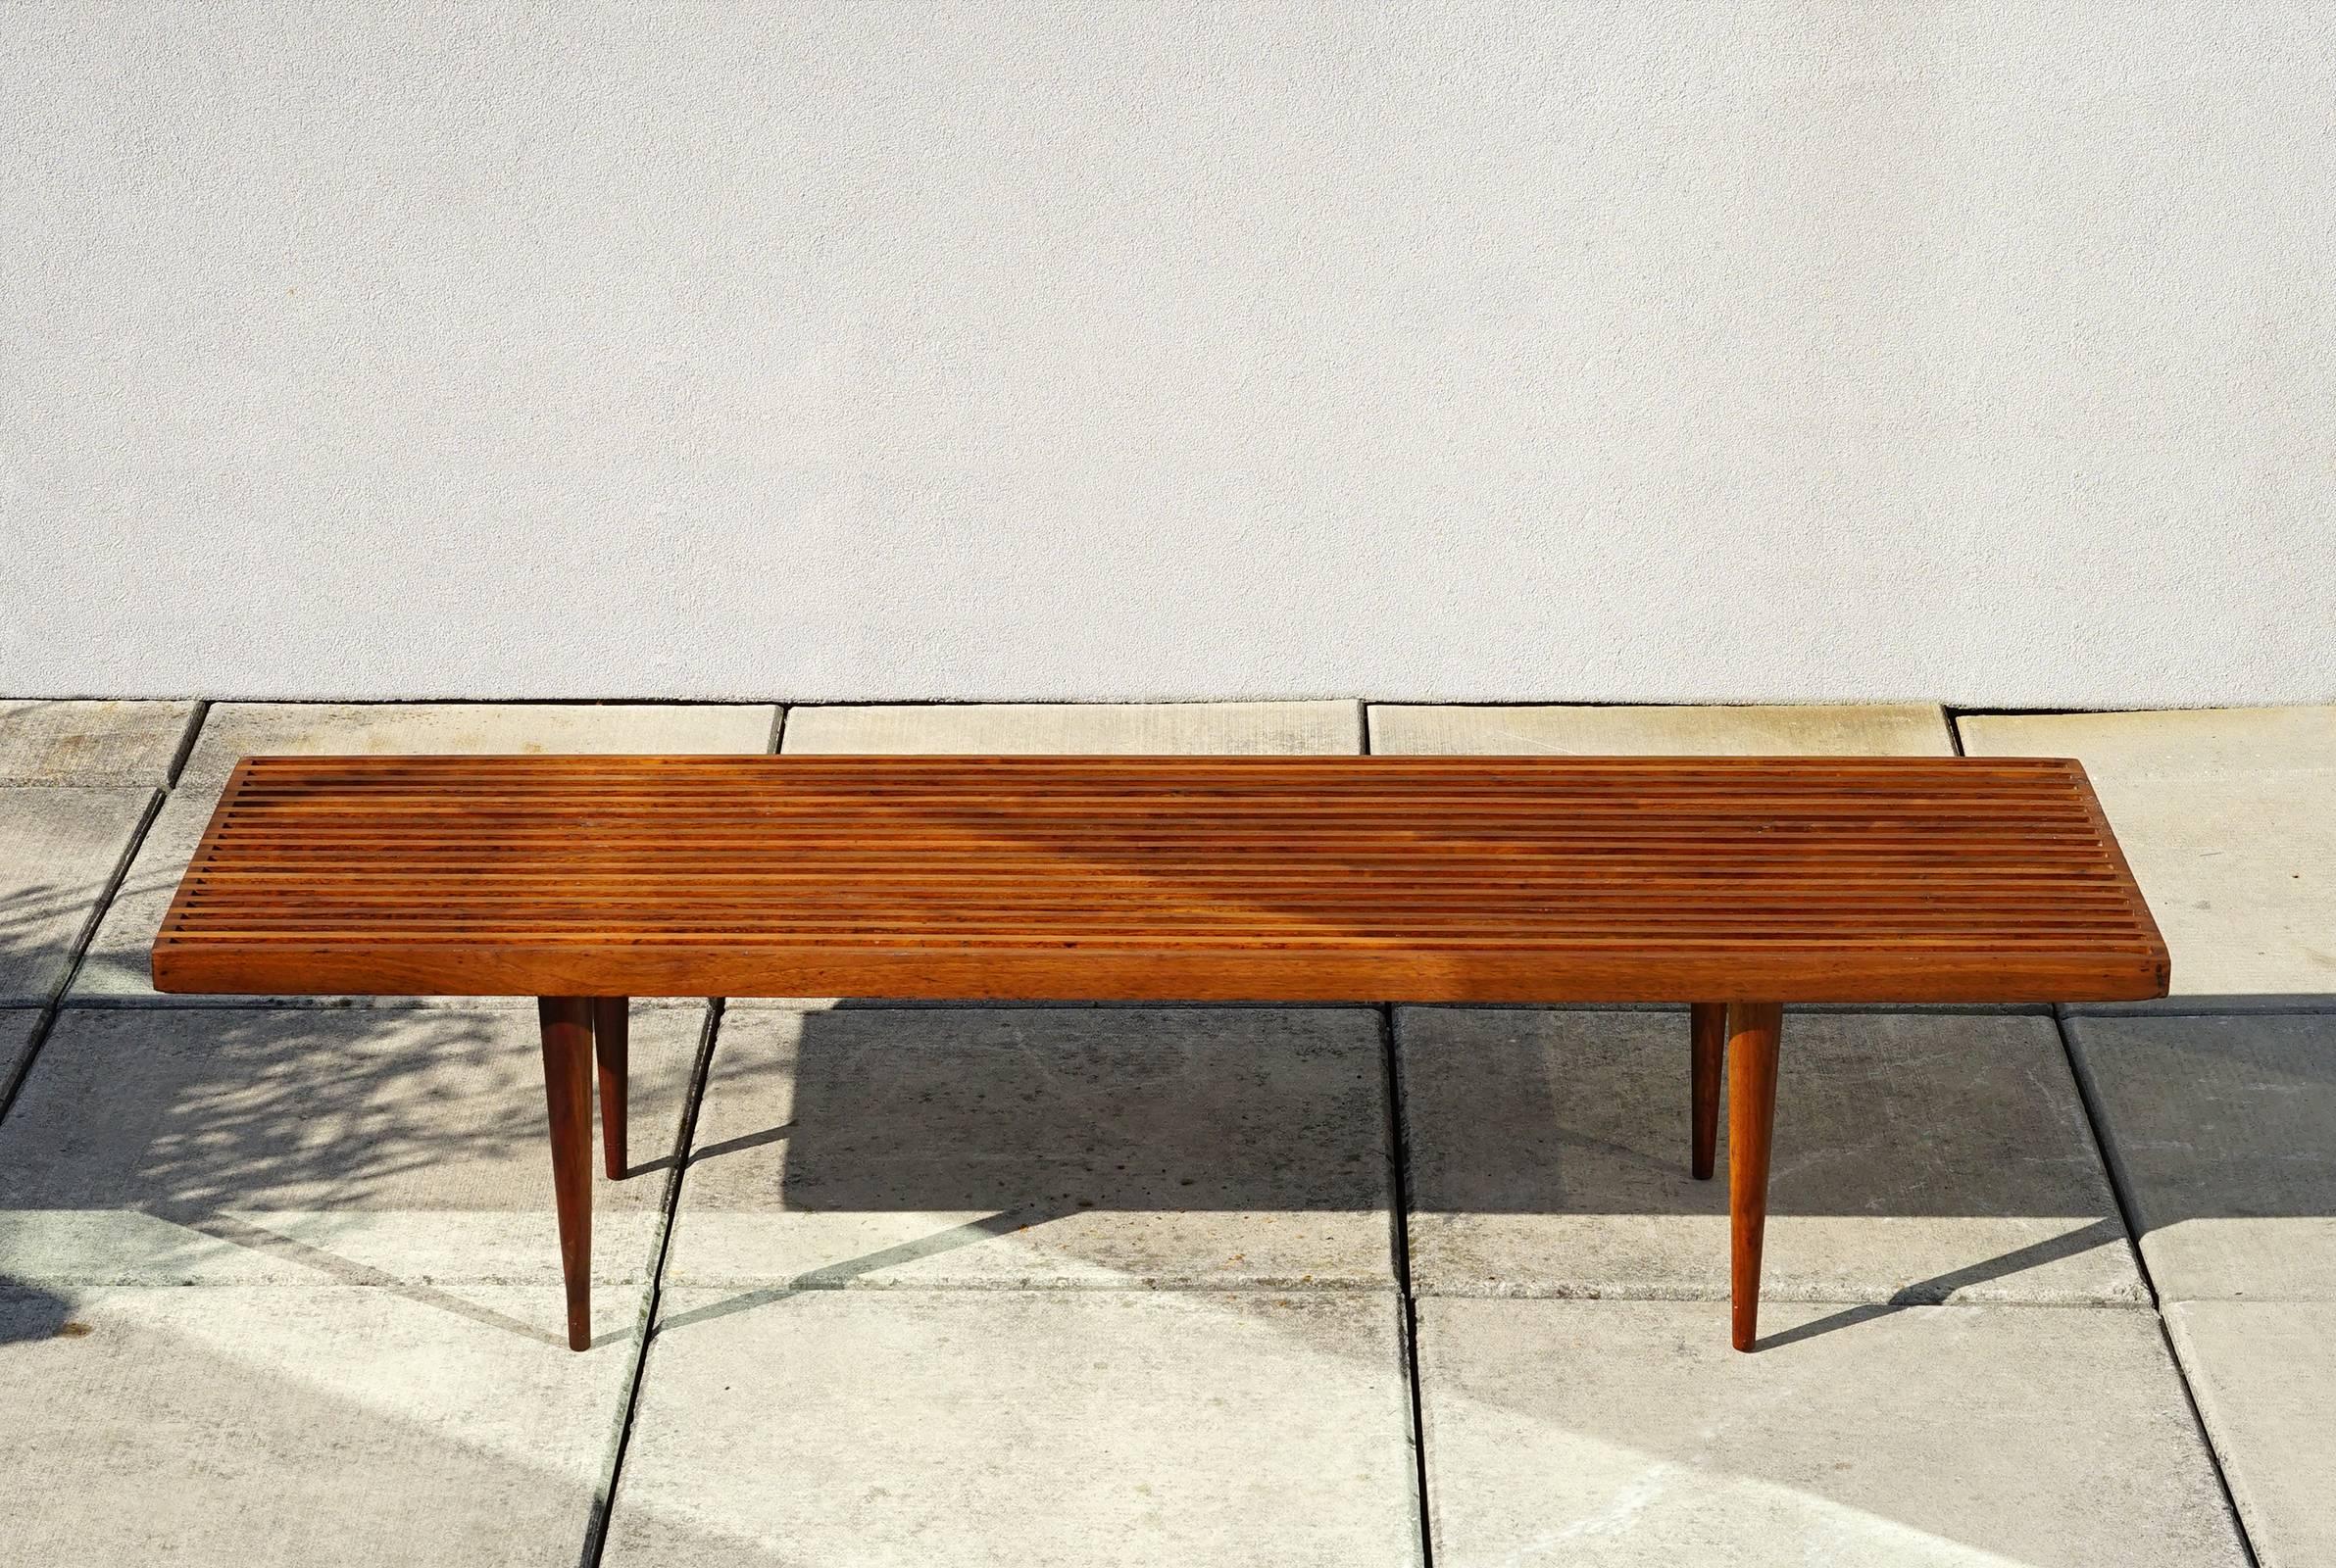 5 feet long. Light and airy design with its long, tapered legs, slender slats, and cantilevered top. Solid American walnut components. Original 1950s production. Legs screw off without tools for easy transport or storage. Handsome and versatile as a